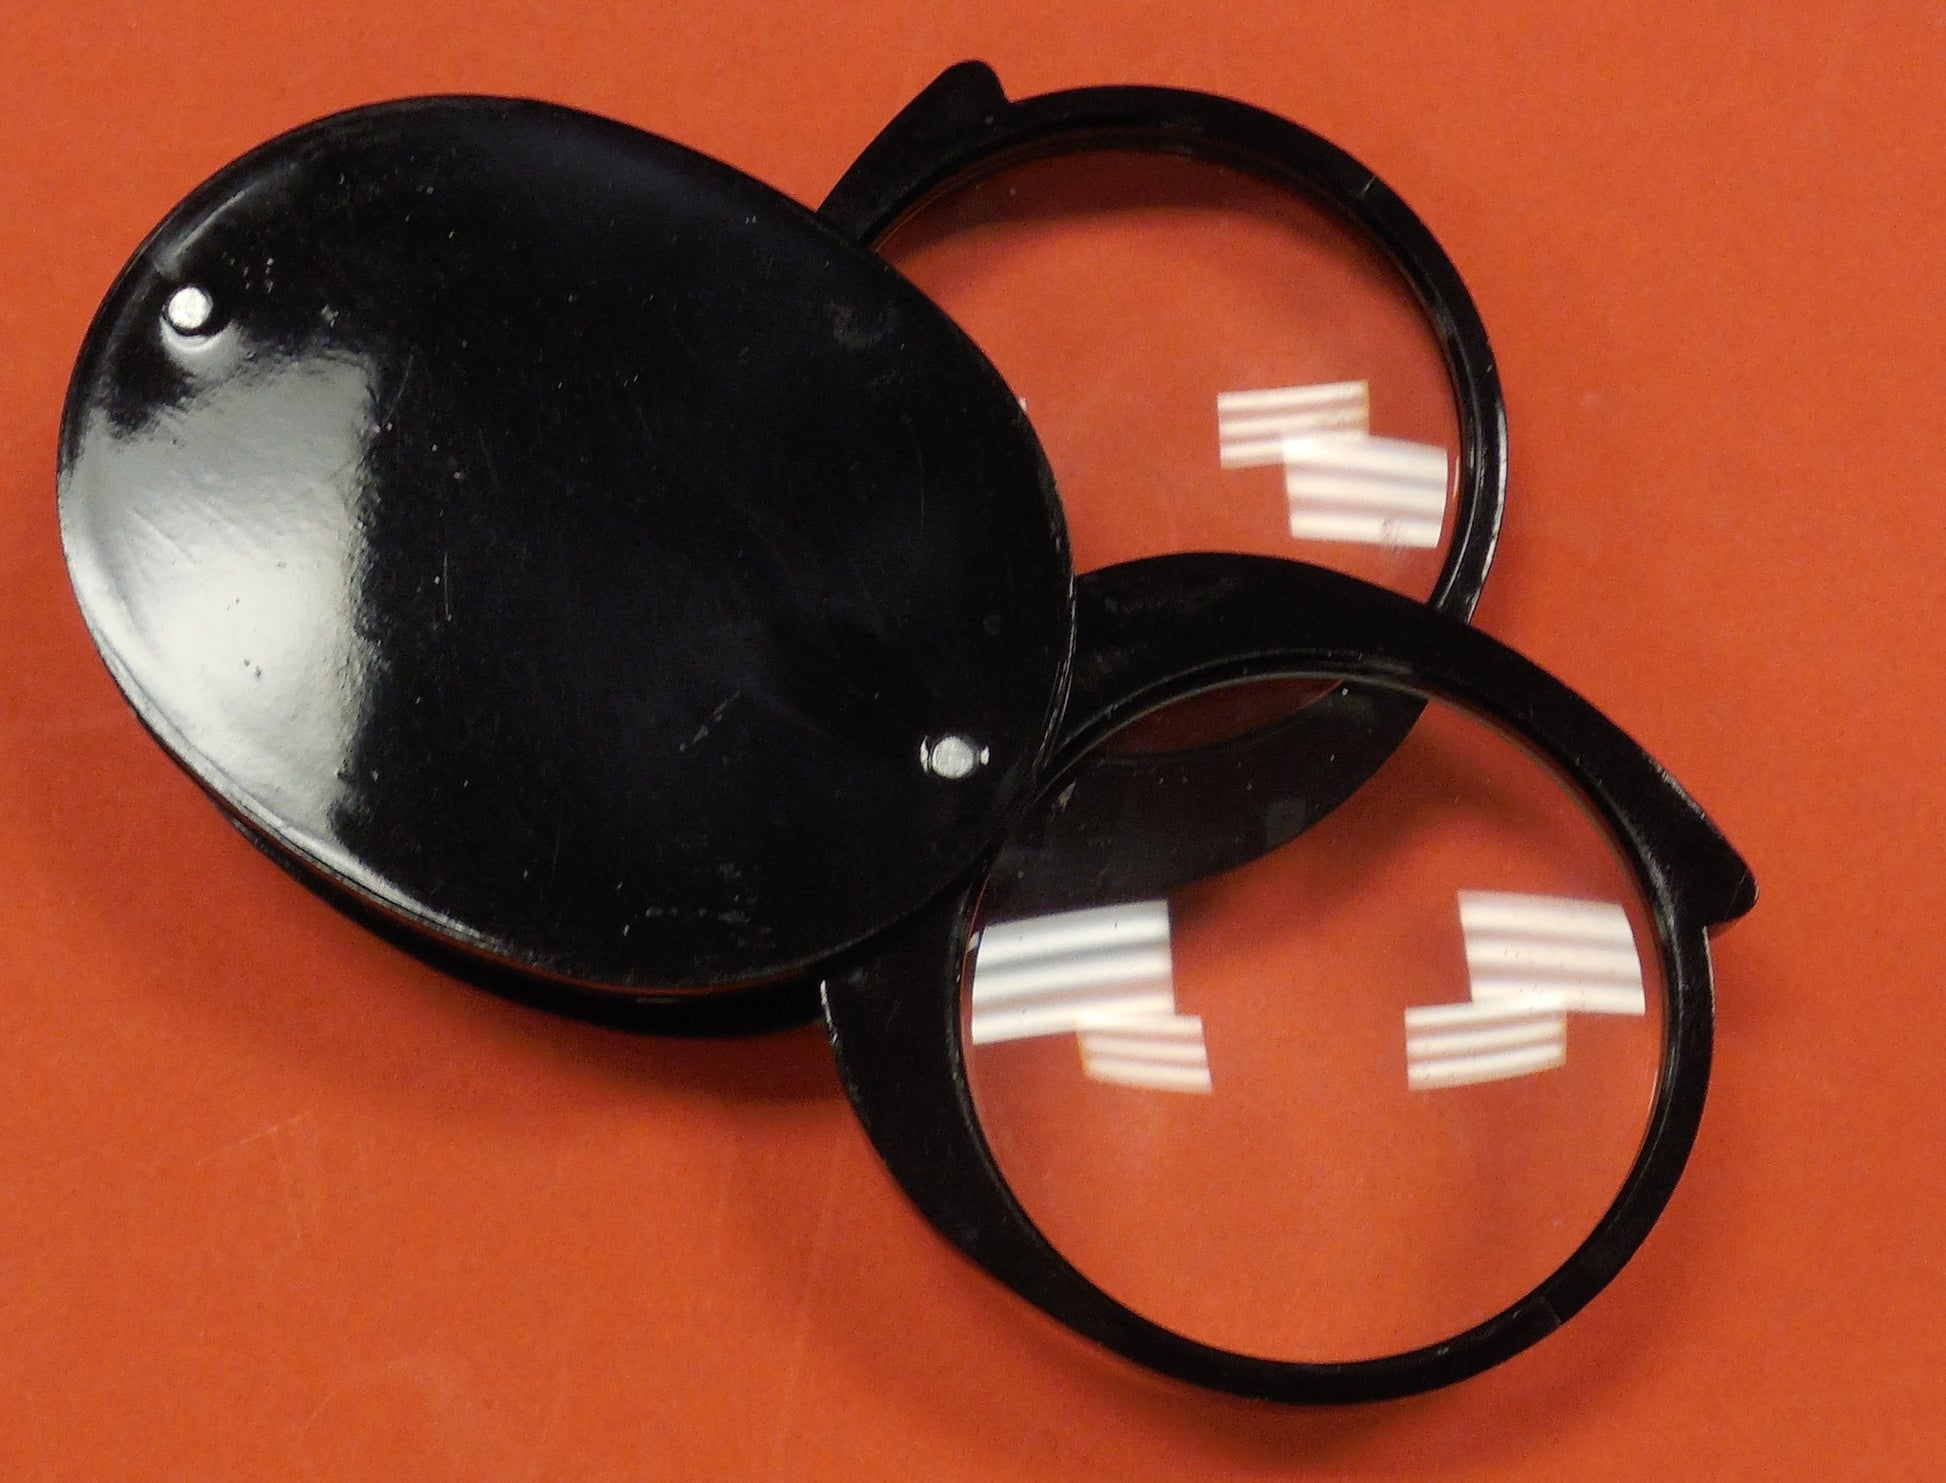 A pocket magnifier that has 2 lenses for optimal magnification. They fold into a black plastic casing